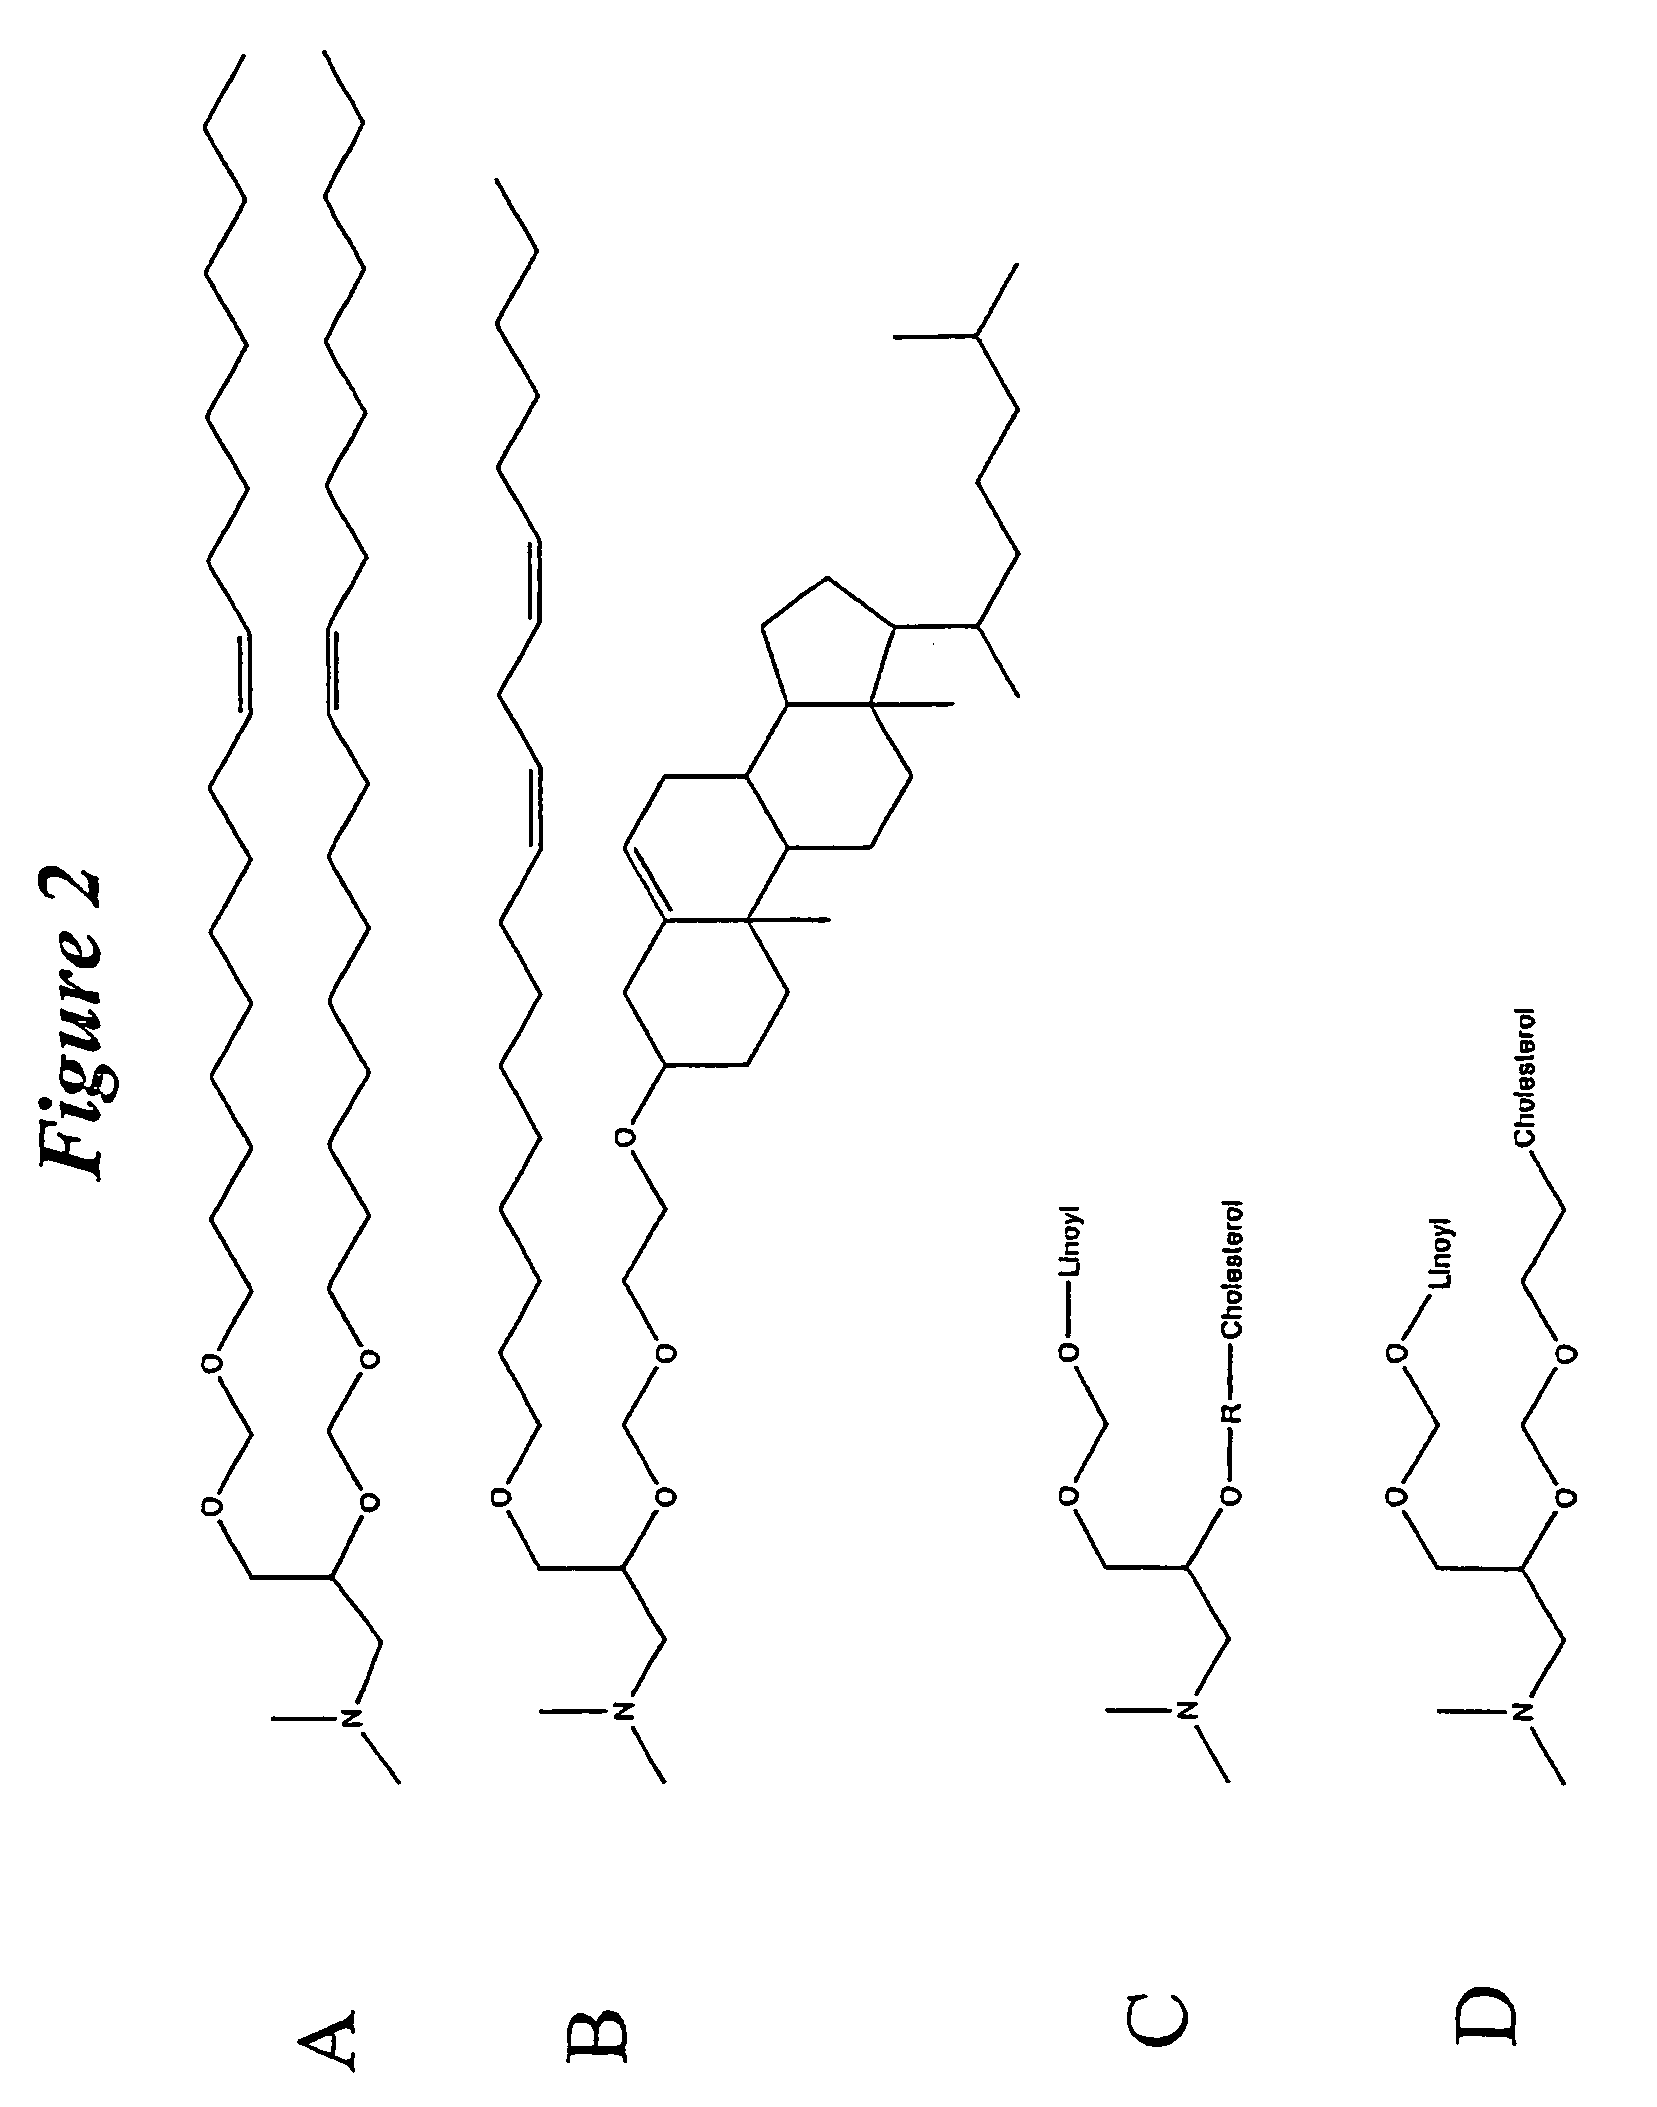 Lipid nanoparticle based compositions and methods for the delivery of biologically active molecules